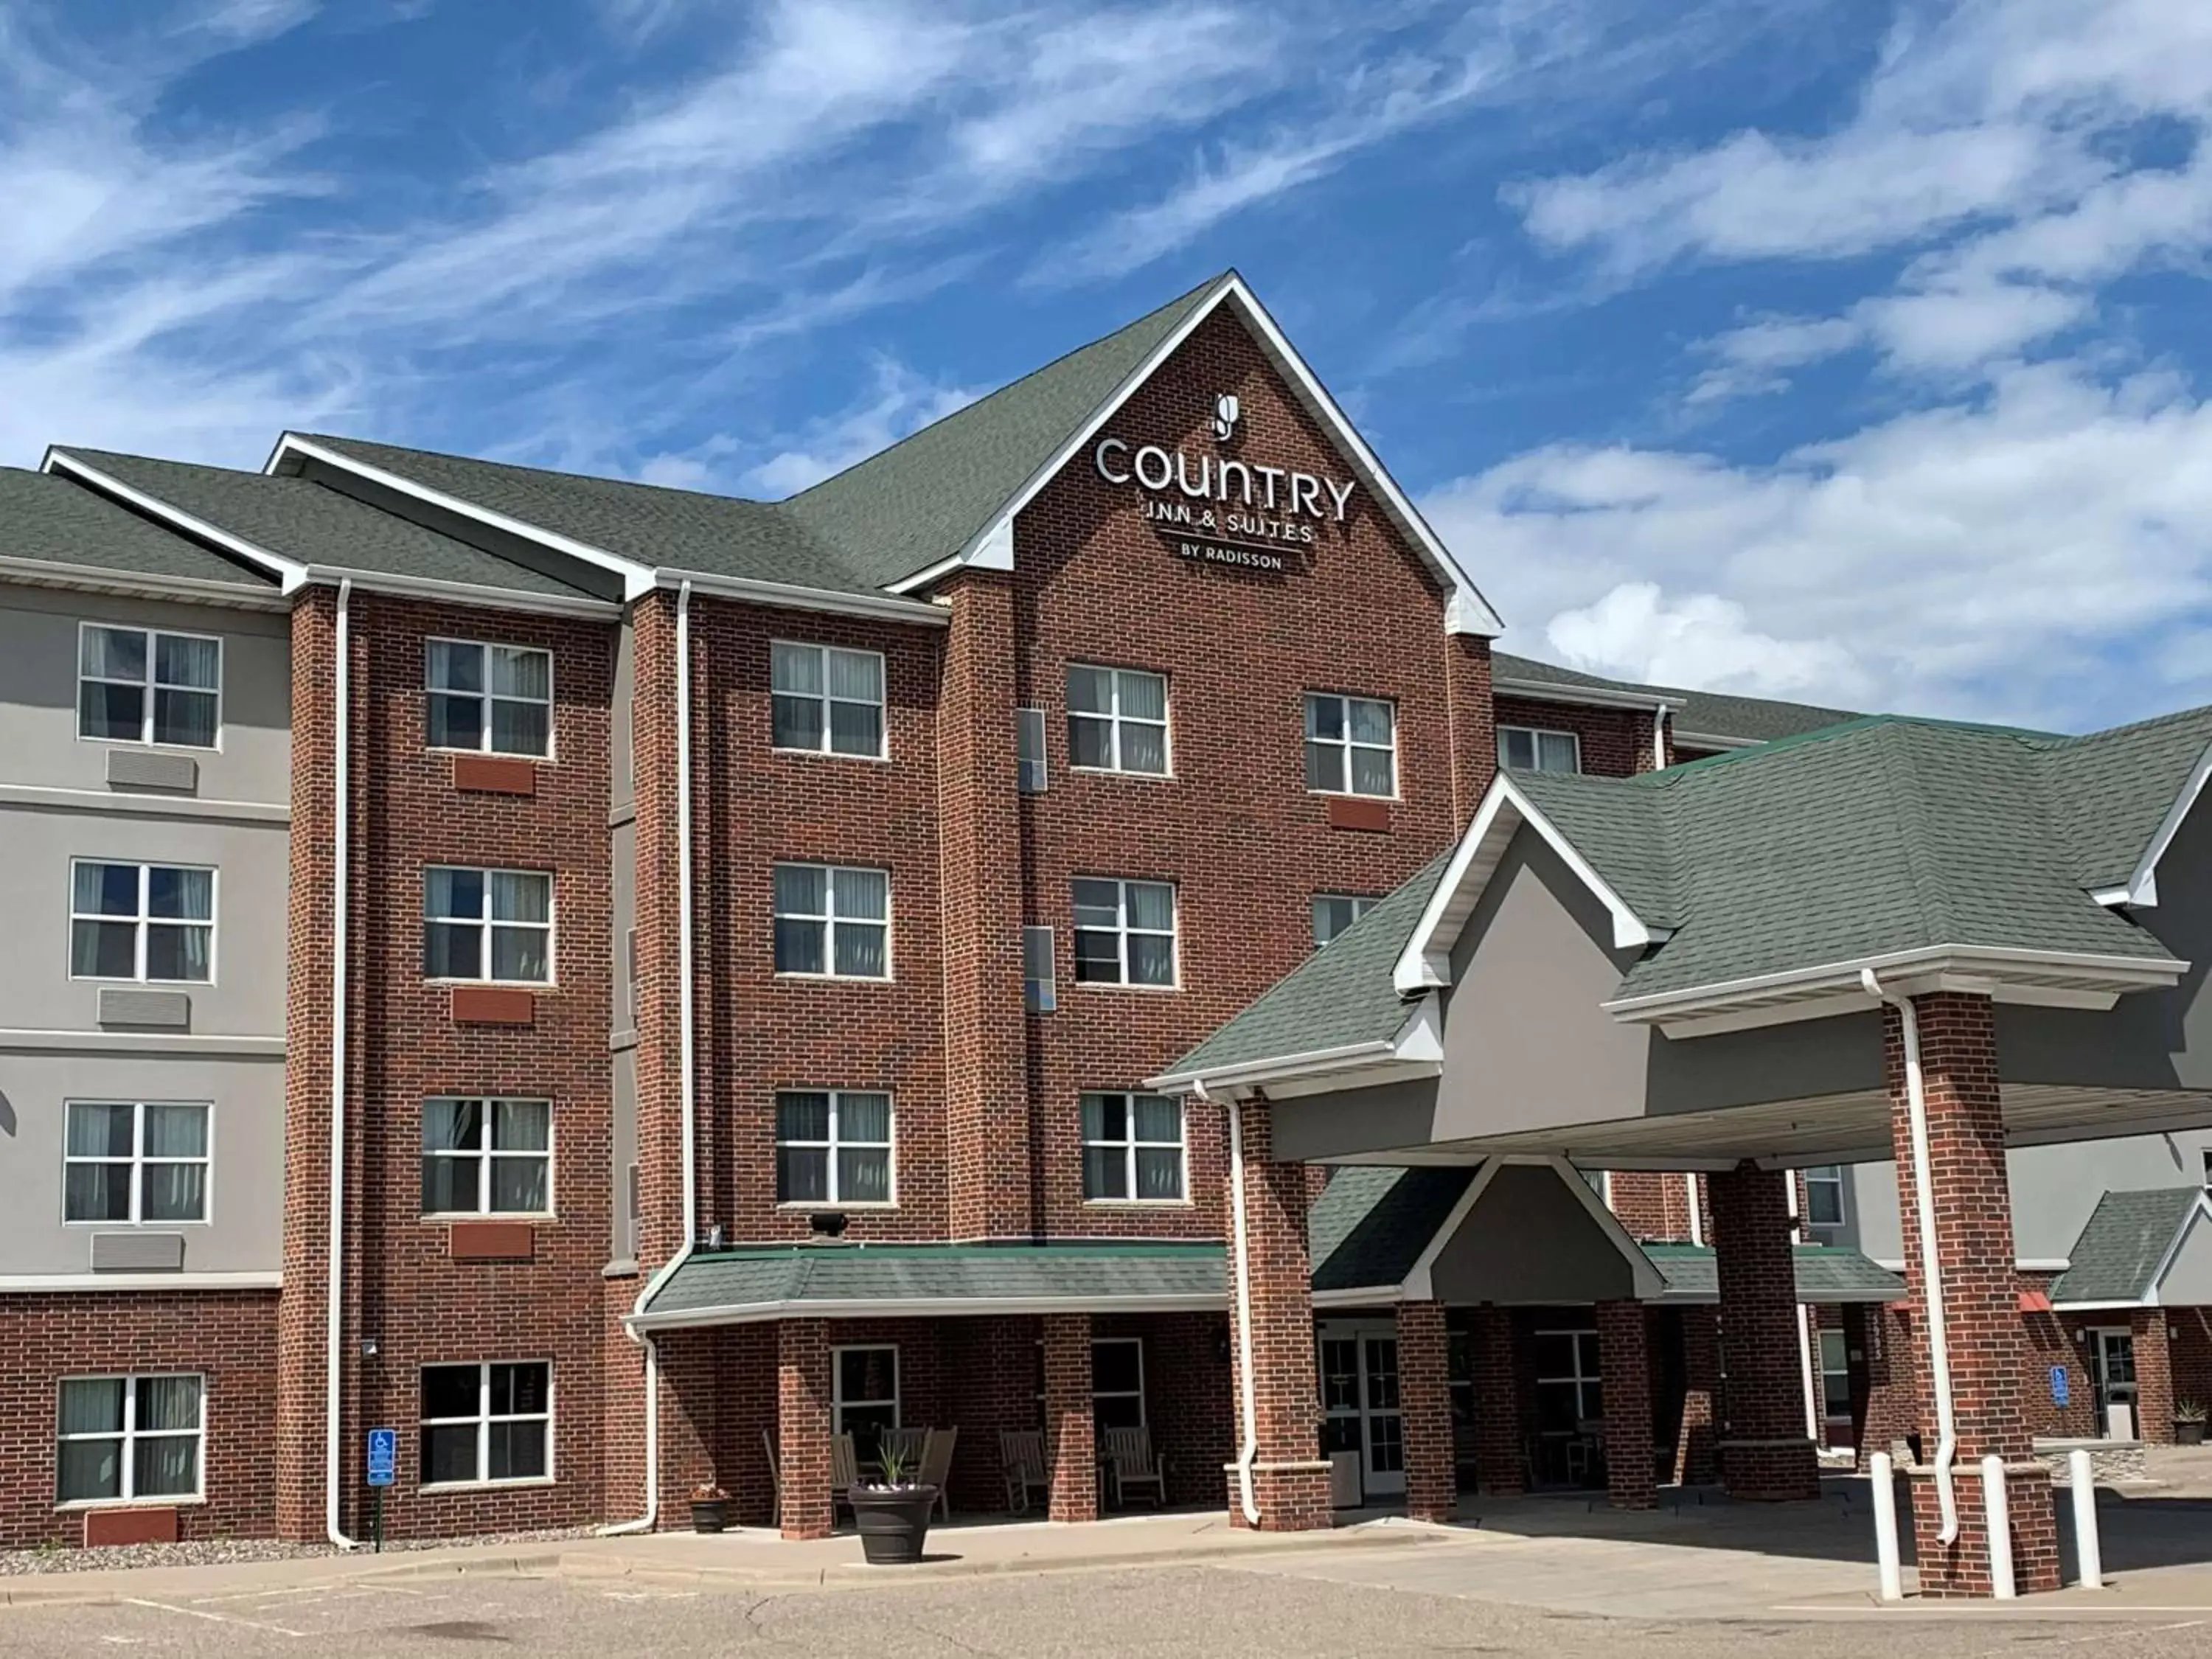 Property Building in Country Inn & Suites by Radisson, Shoreview, MN